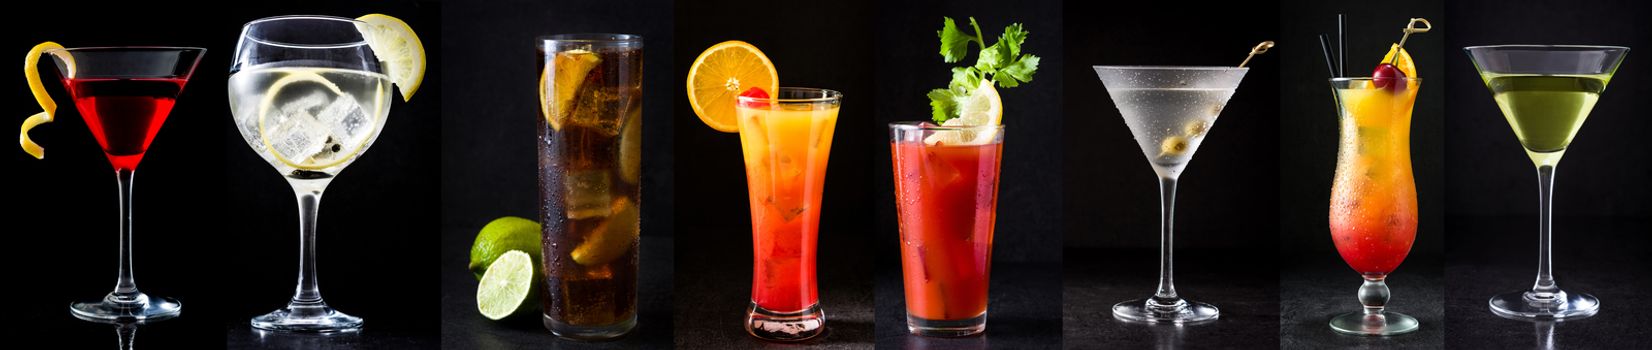 Collage of different cocktails on black background